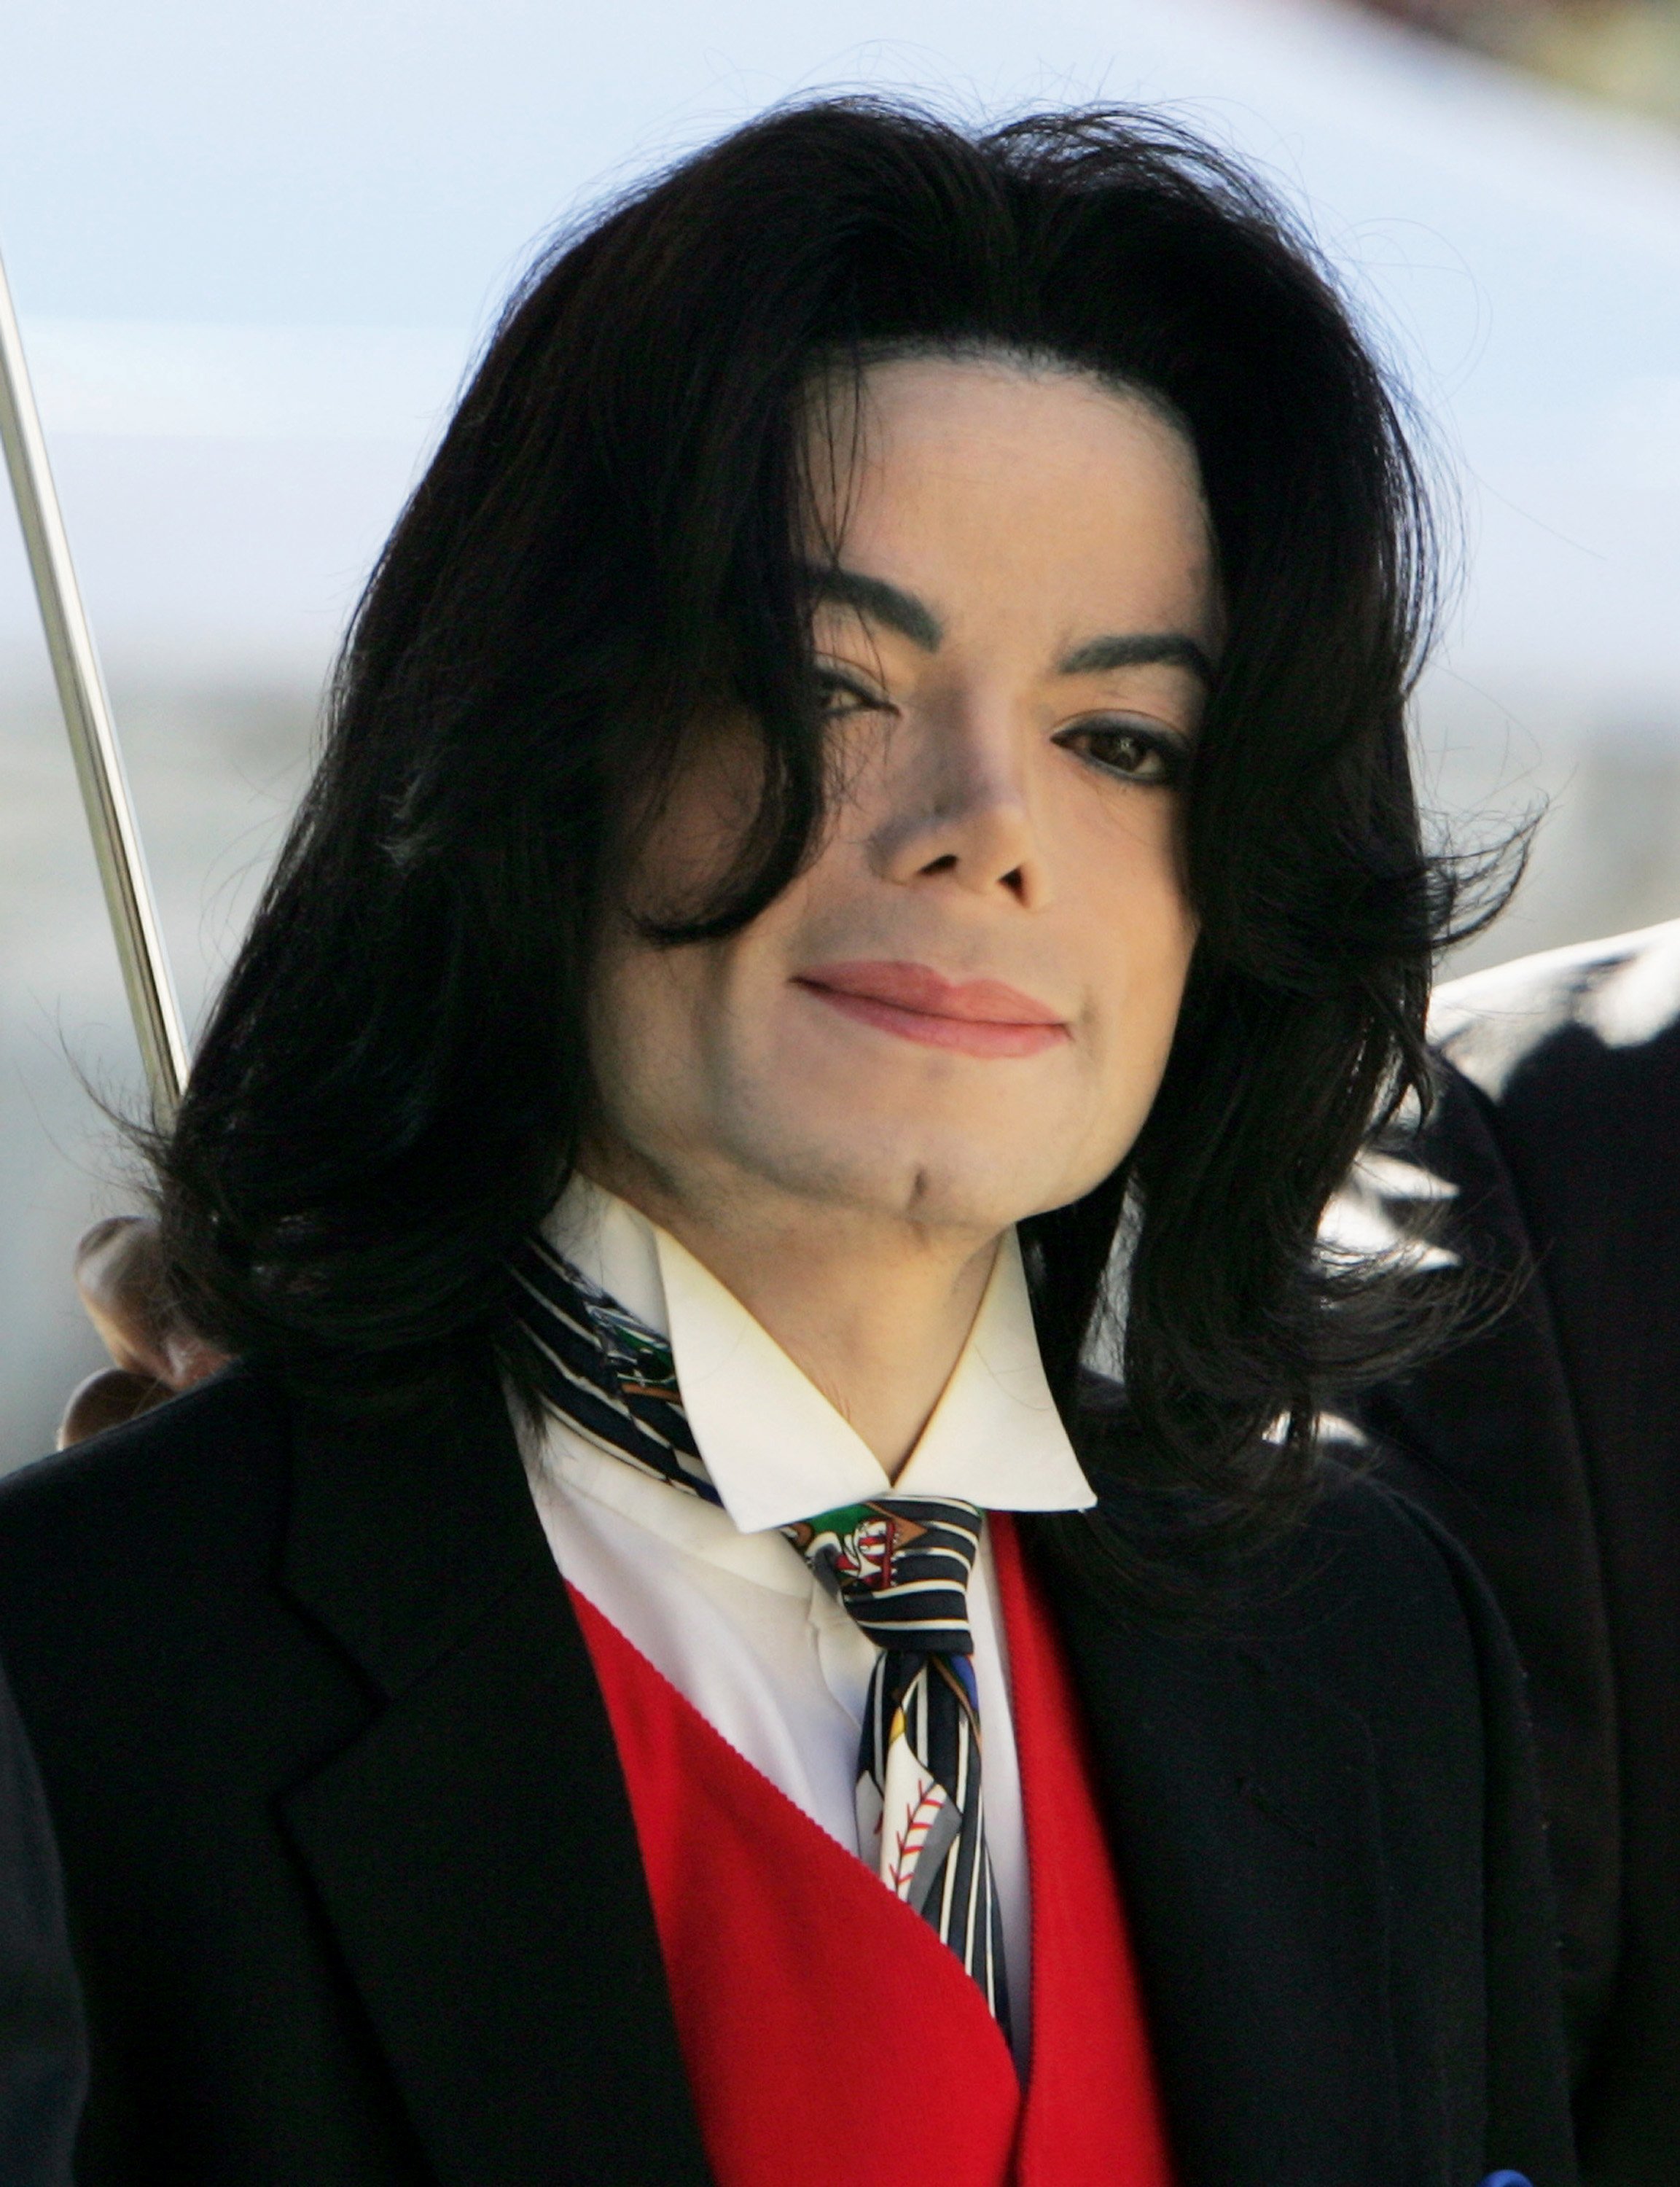 Michael Jackson, late singer | Photo: Getty Images